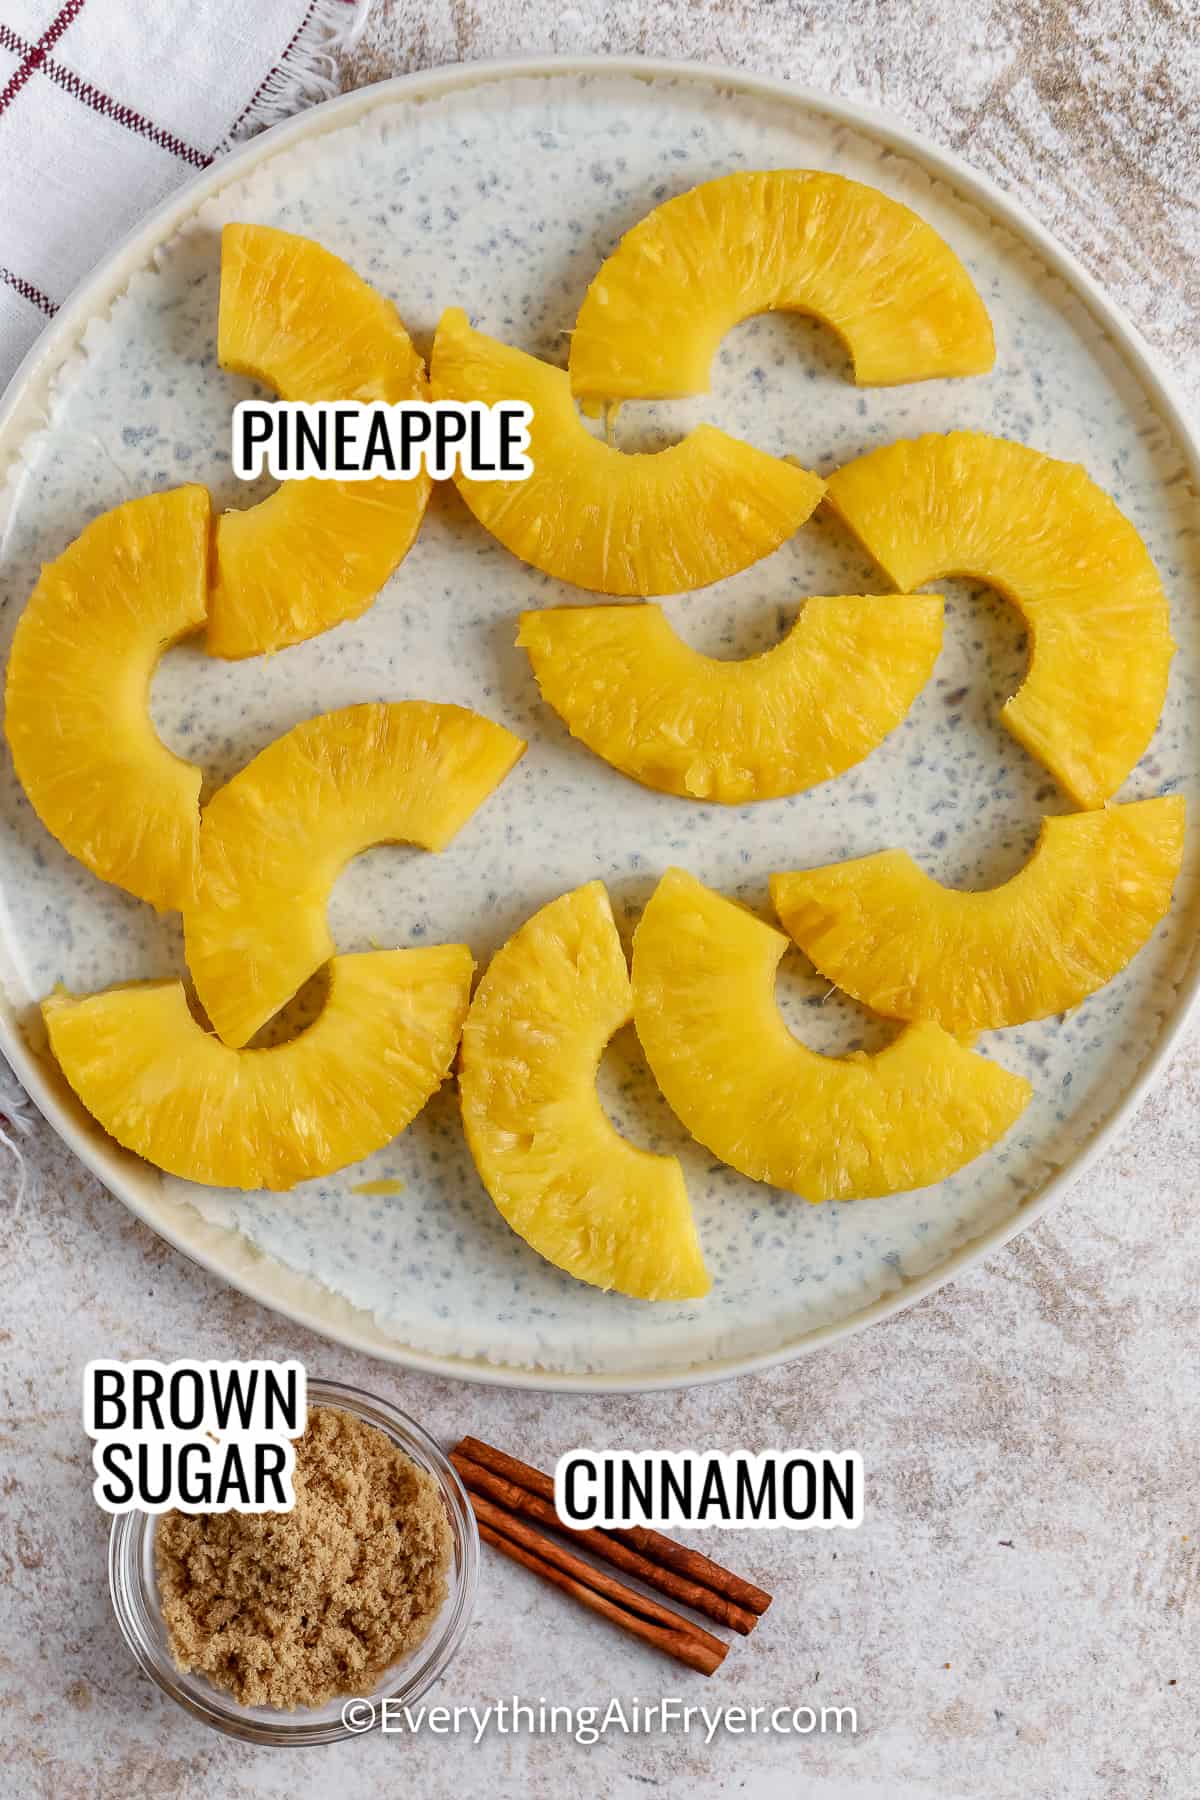 ingredients assembled to make air fryer pineapple including pineapple, brown sugar, and cinnamon